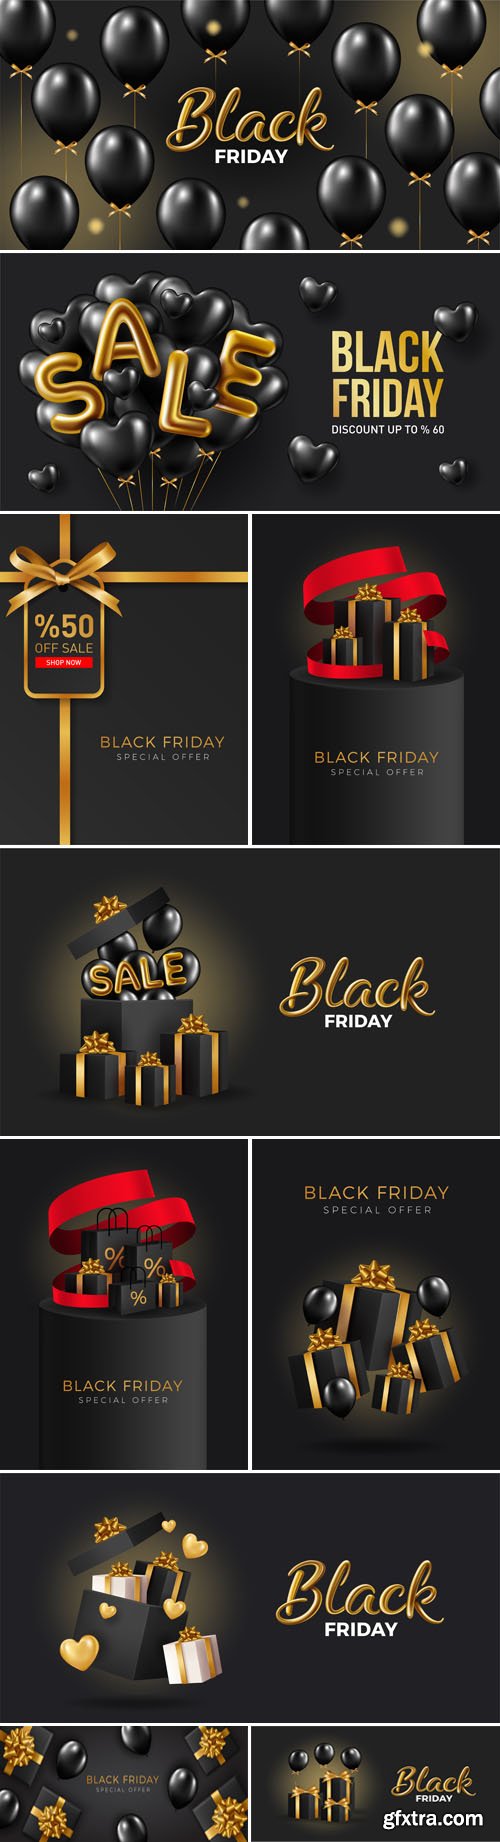 Black Friday - Vector Banners & Backgrounds Templates